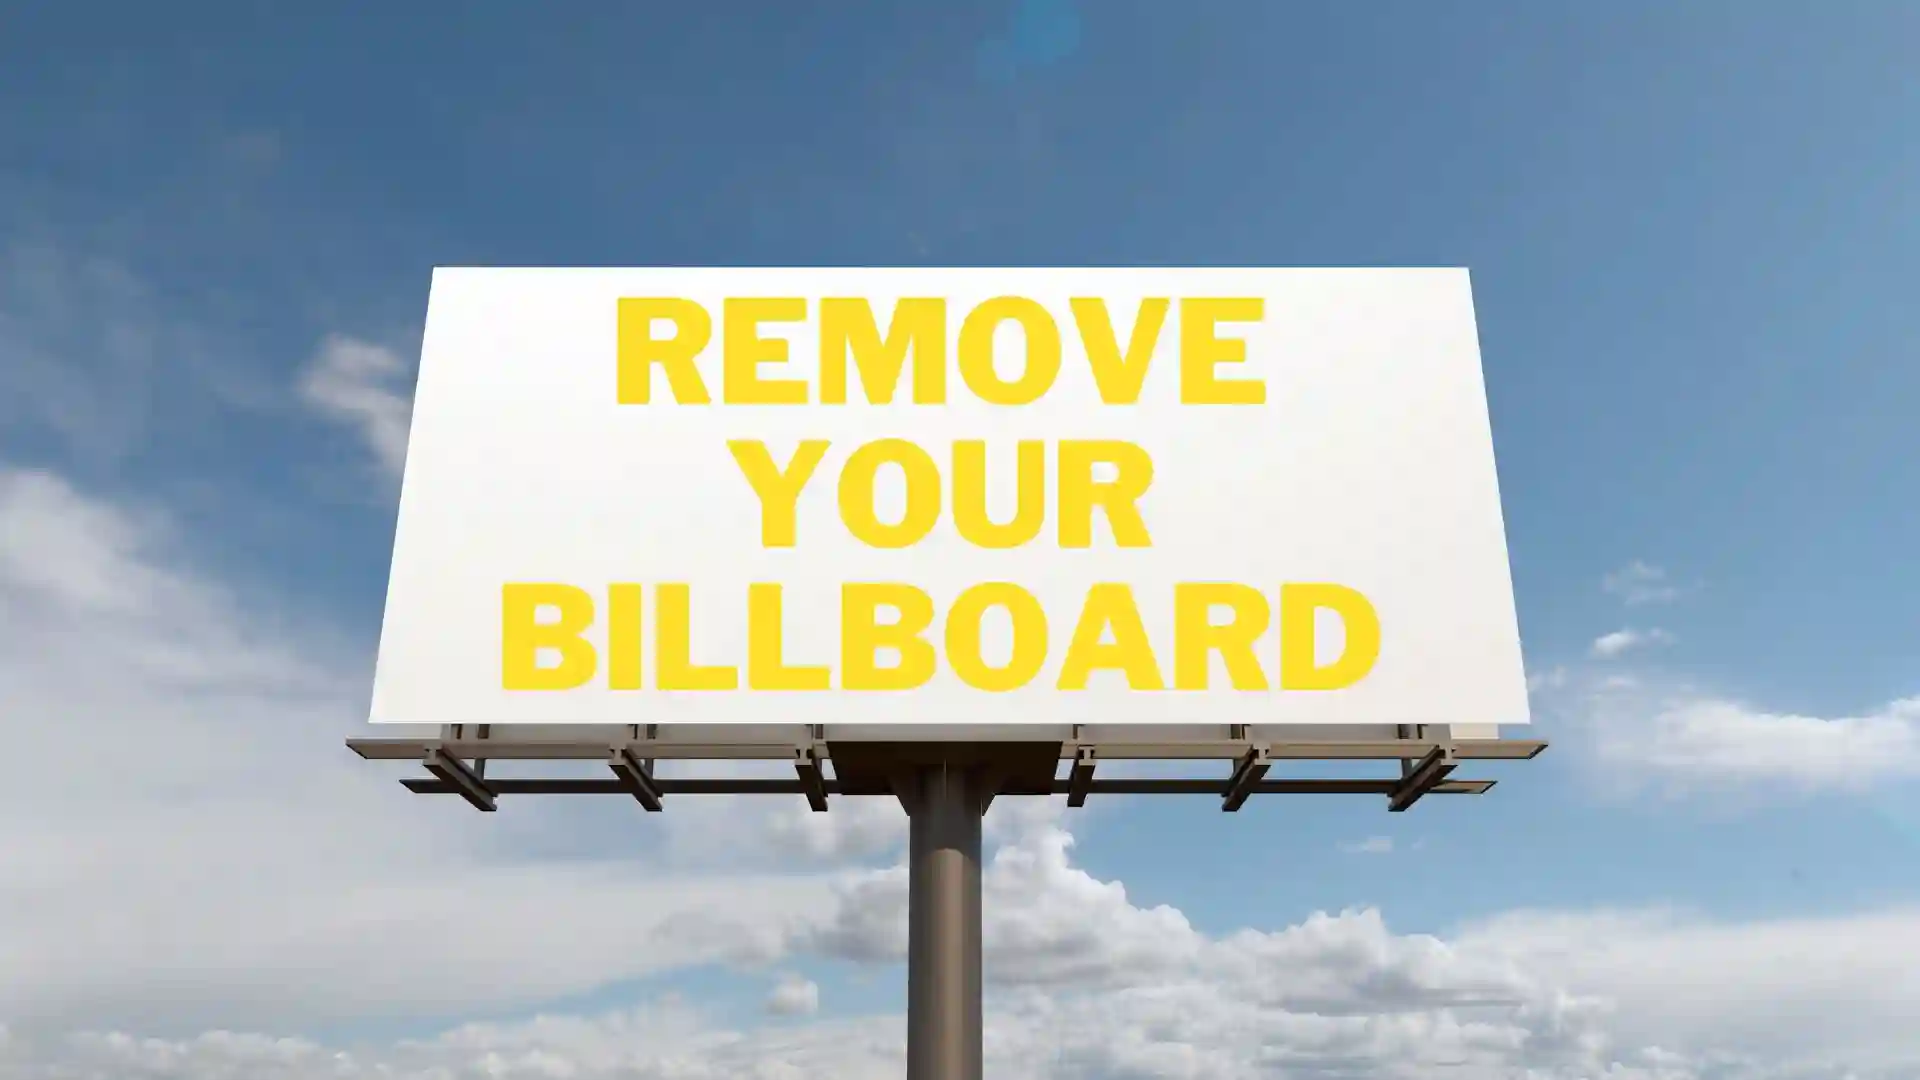 Authorities Order The Removal Of Unauthorised Billboards Within 48 Hours